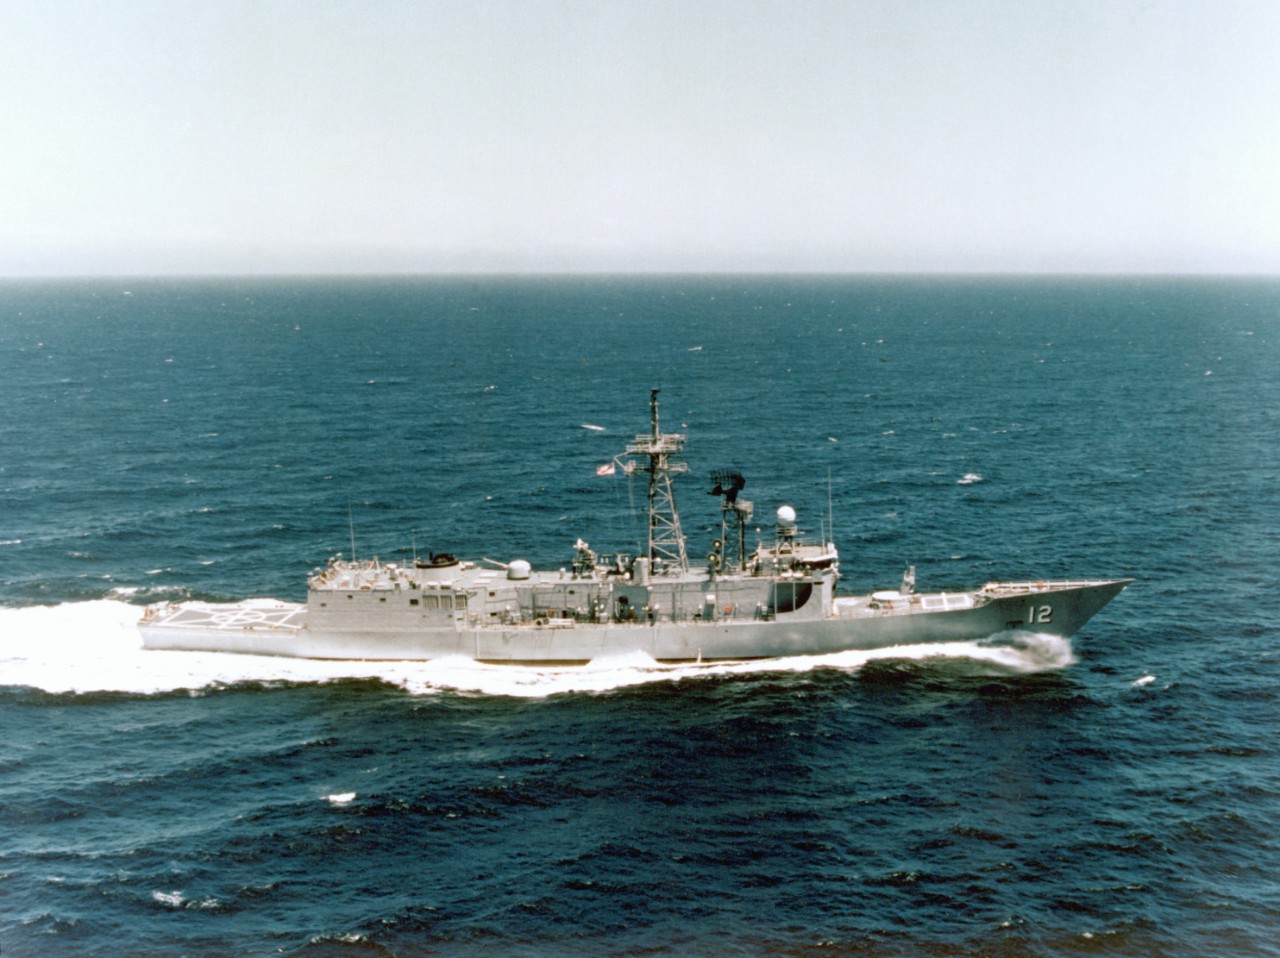 George Philip underway at sea circa 1982. (U.S. Navy Photograph DN-SC-83-07307, National Archives and Records Administration, Still Pictures Division, College Park, Md.)